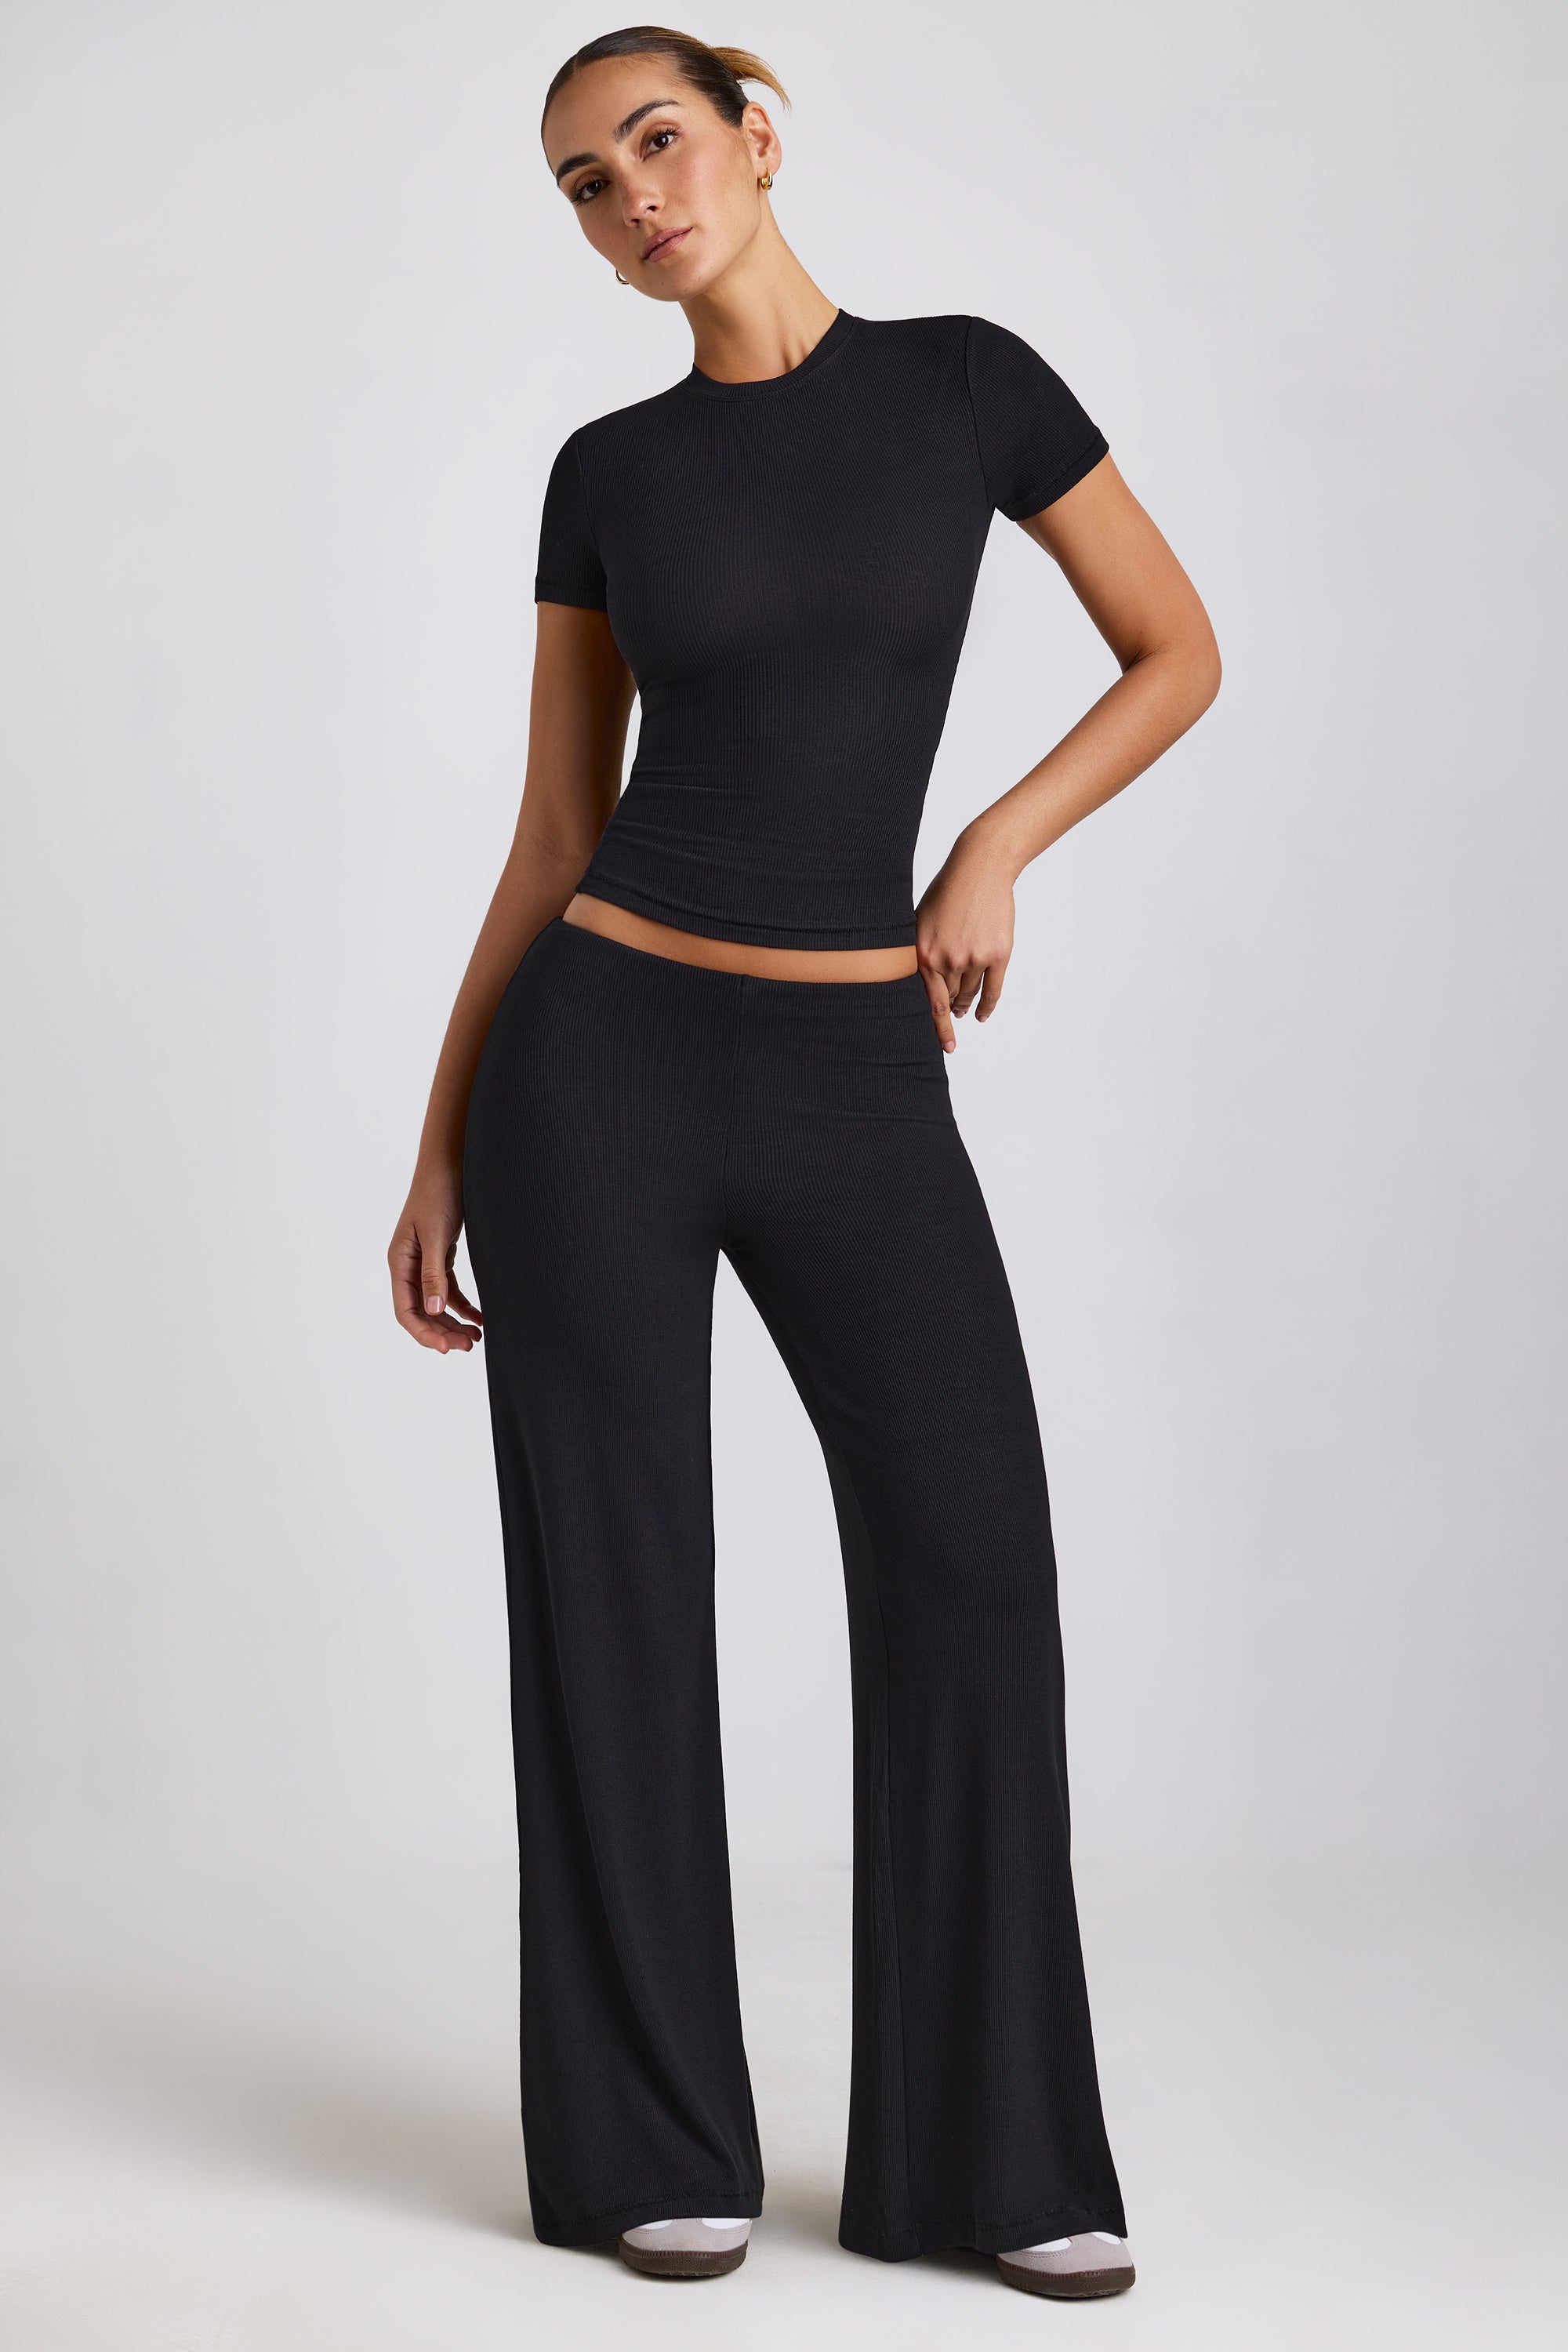 Buy Women's Tall High Waisted Trousers Online | Next UK